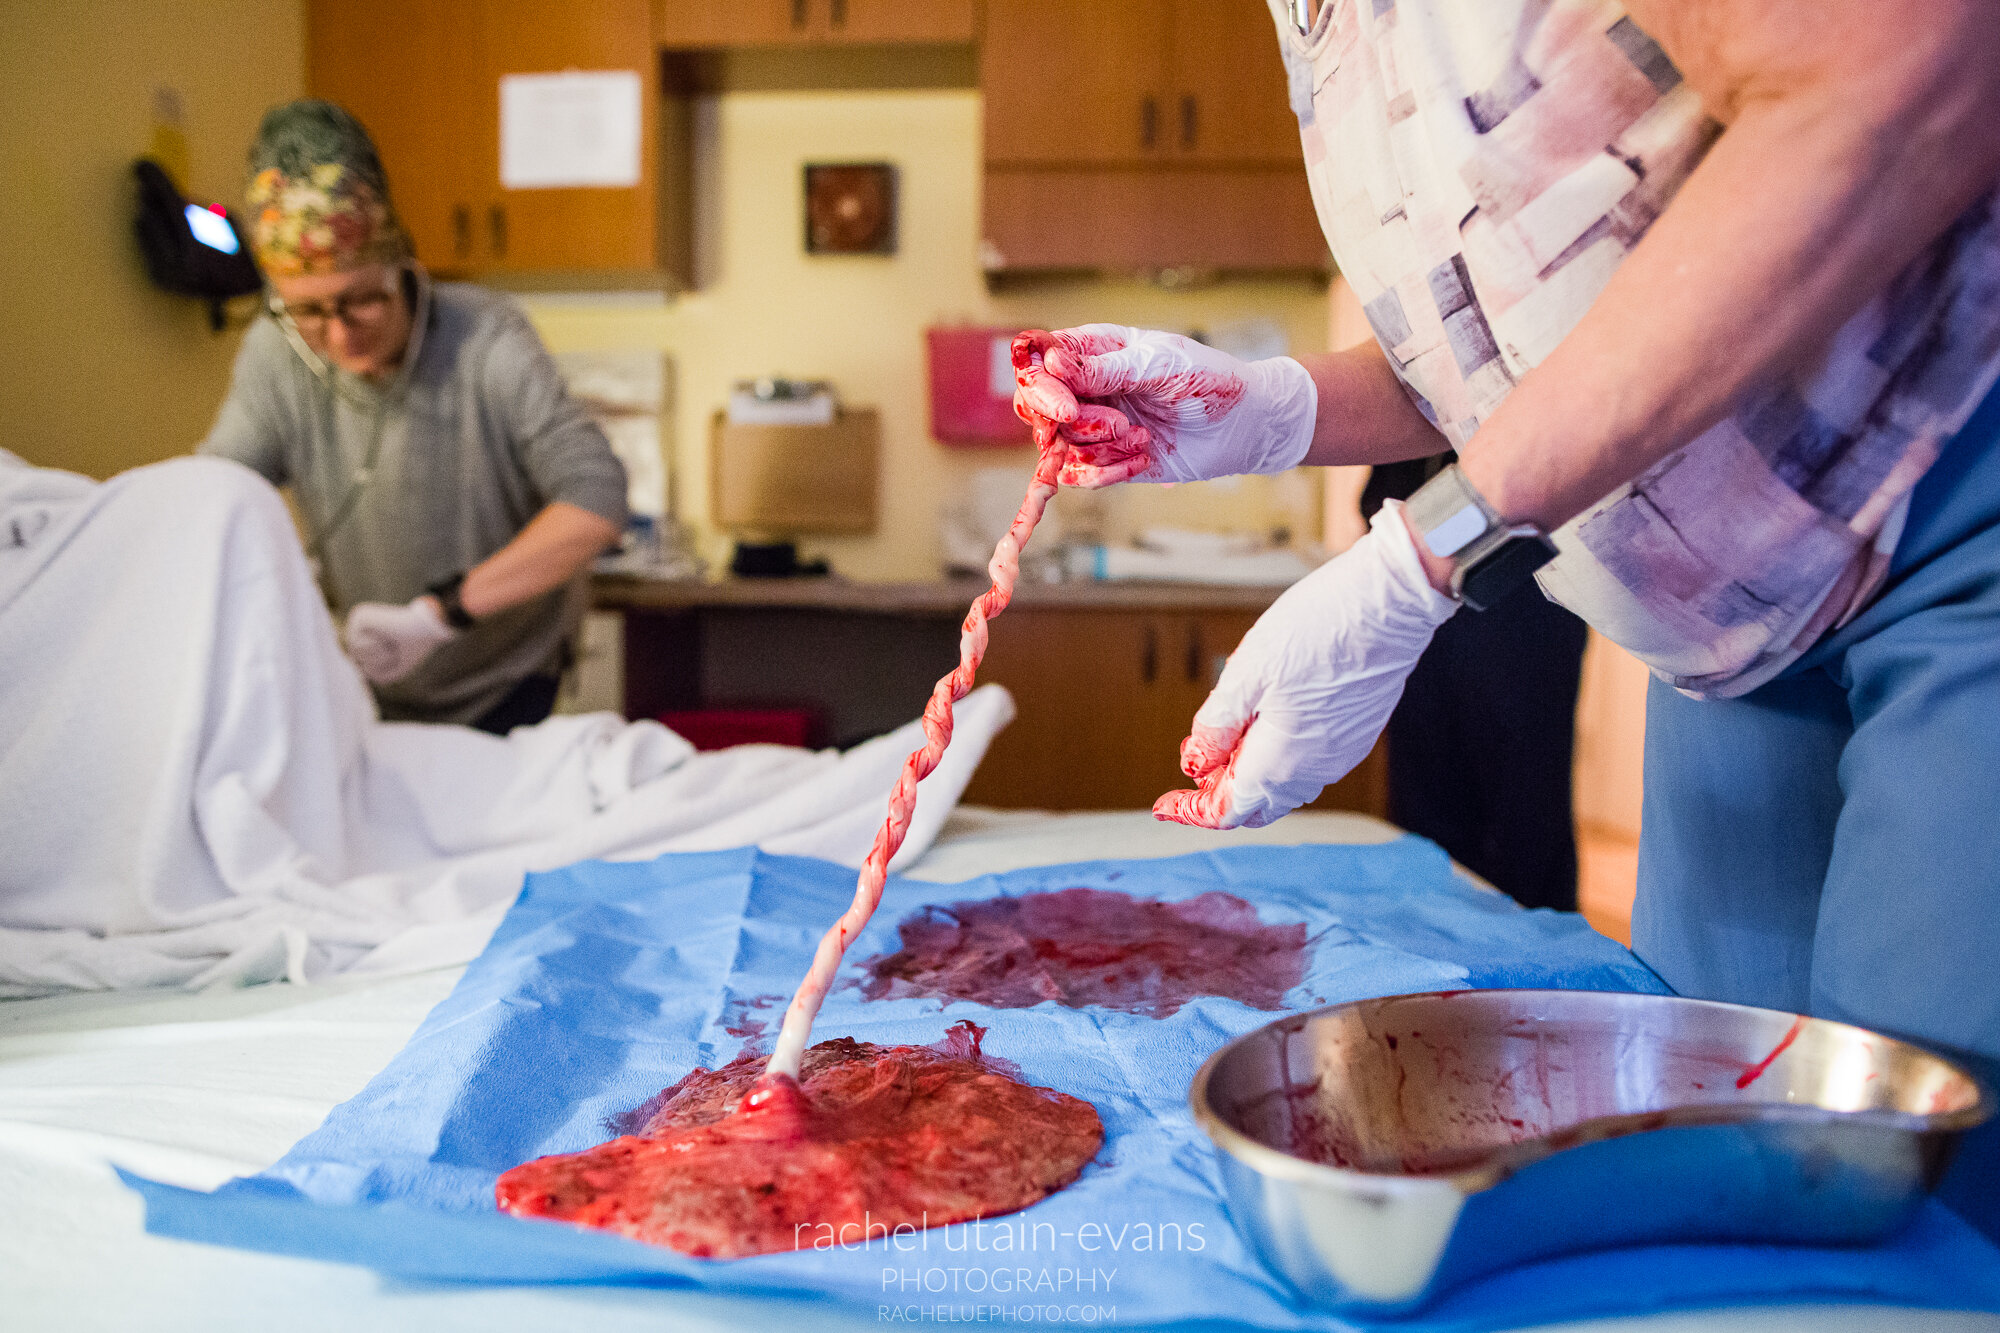 Midwife extends white umbilical cord to show blood has transferred to baby while examining placenta, Philadelphia Birth Photographer